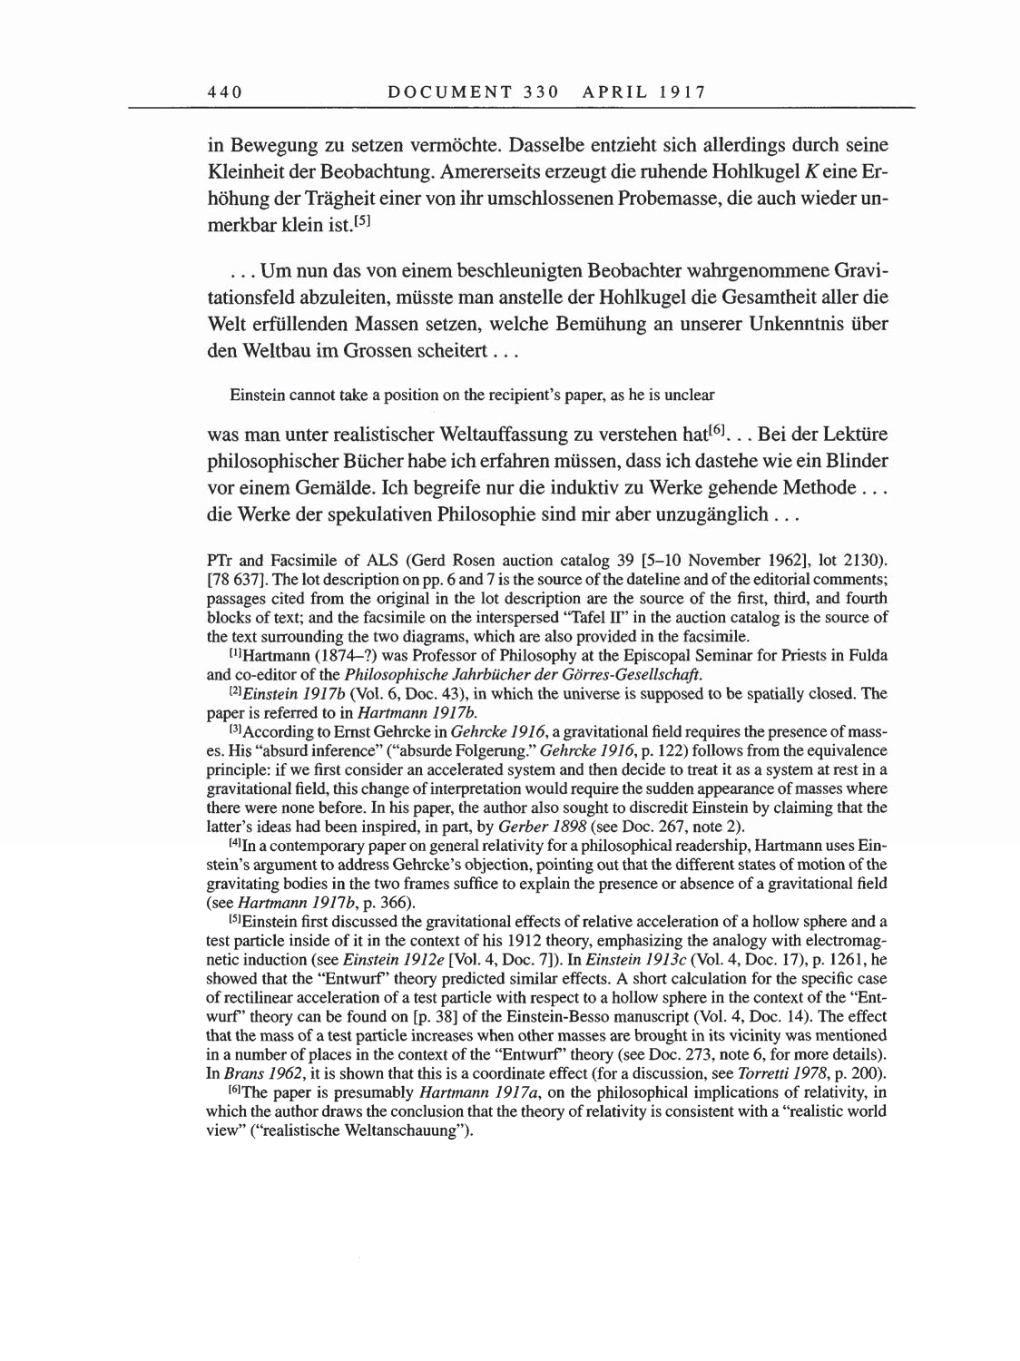 Volume 8, Part A: The Berlin Years: Correspondence 1914-1917 page 440